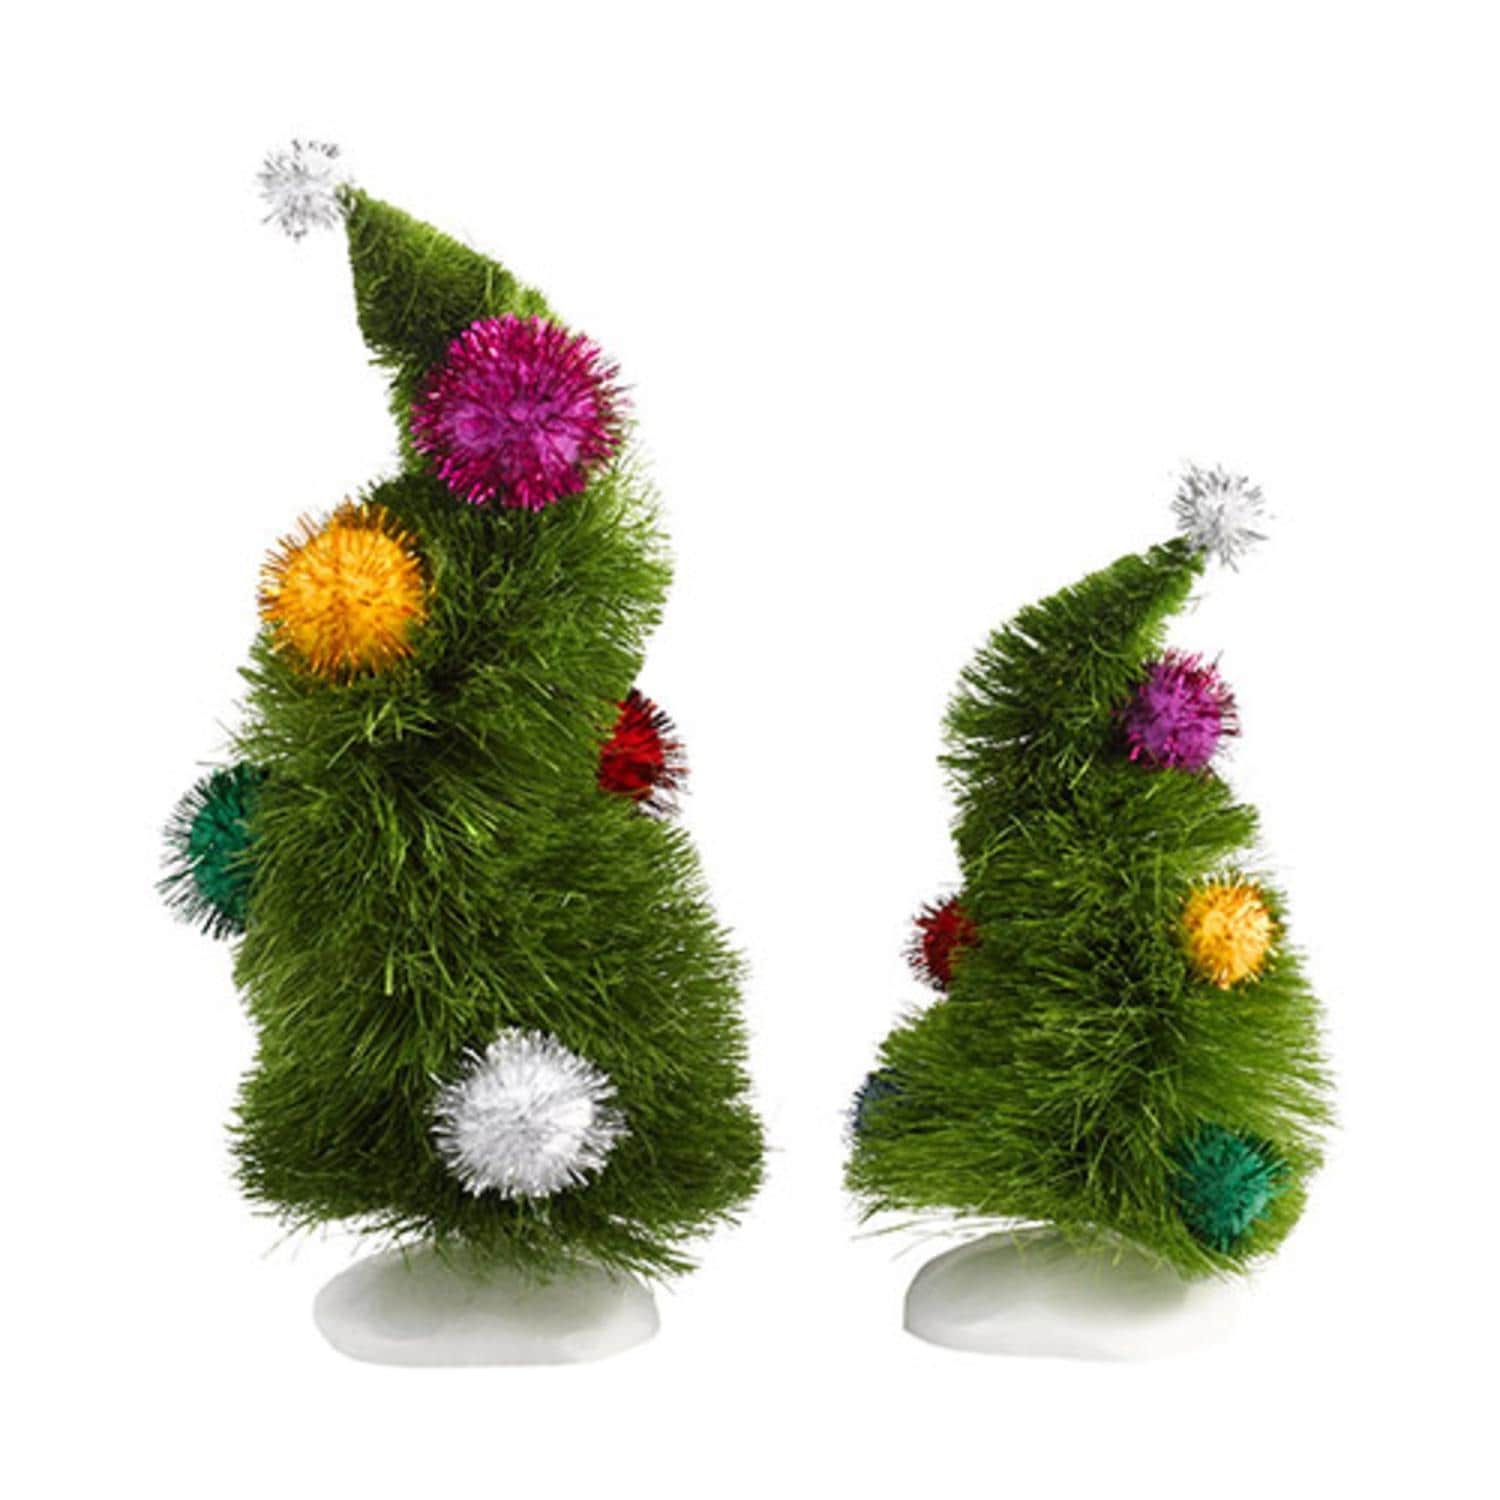 Christmas Grinch Ornaments,Grinch Stole Christmas,Grinch Decorations for  Christmas Tree,Merry Christmas Hanging Decor 